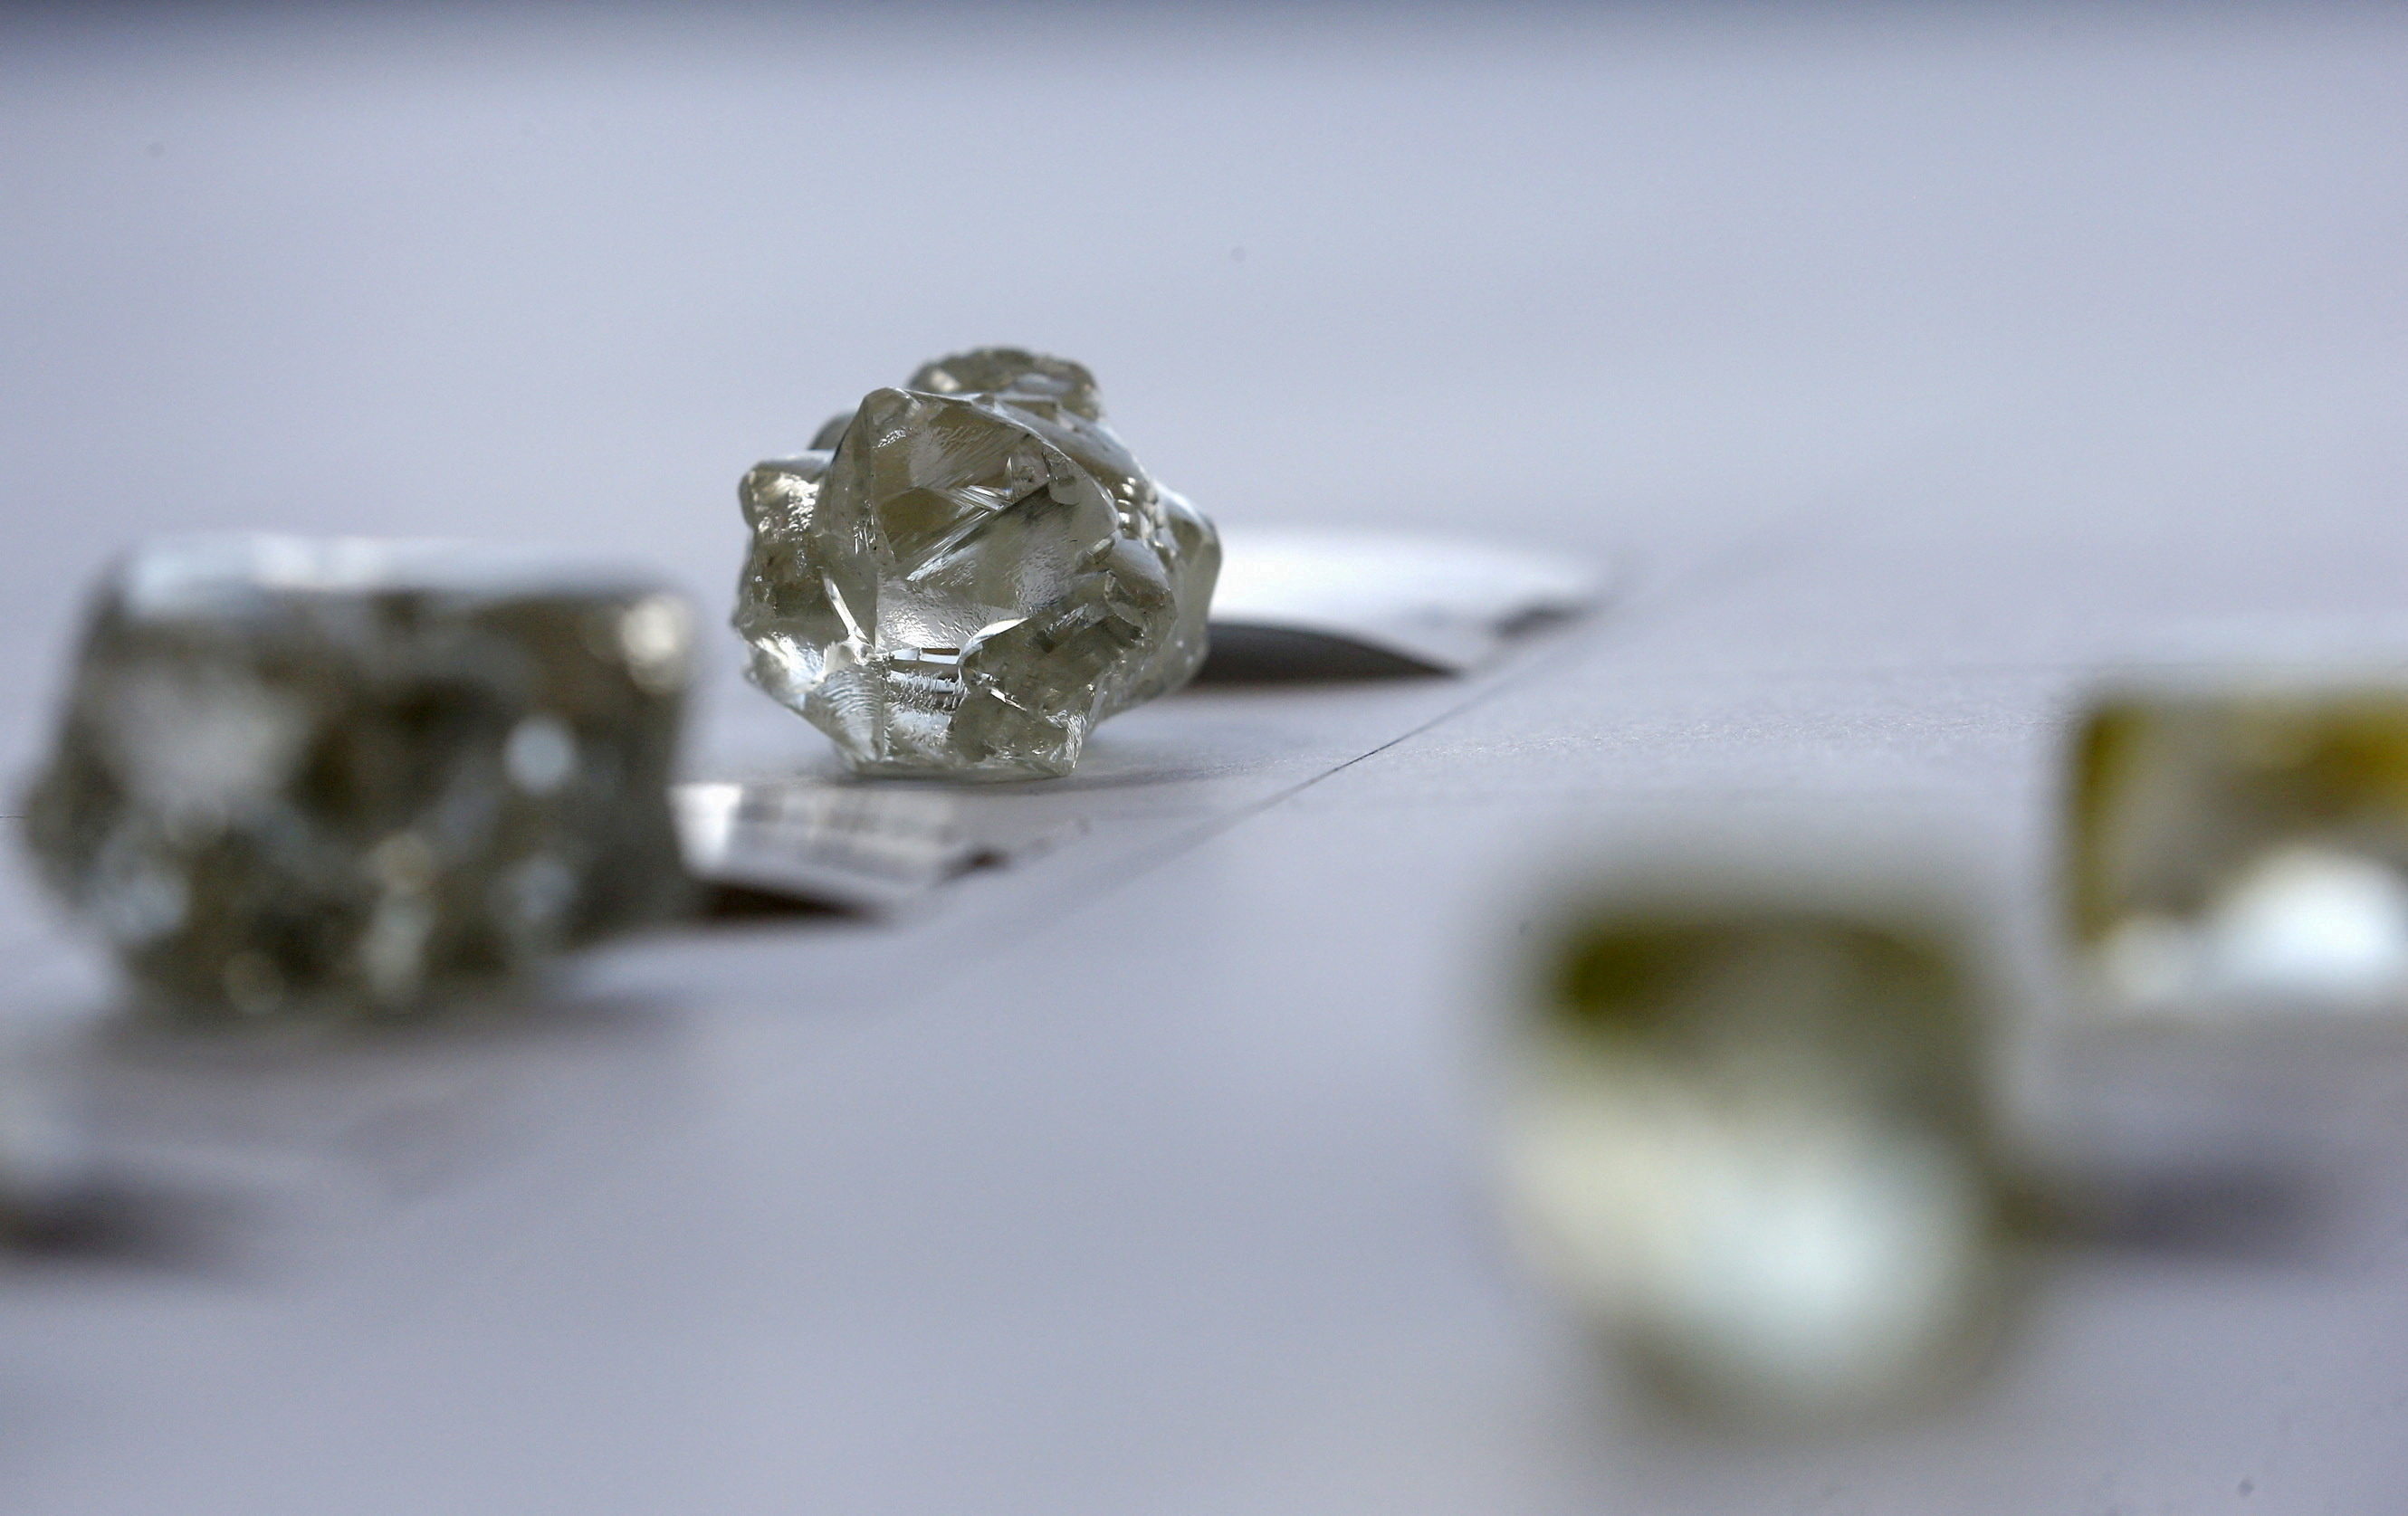 Diamonds are displayed at the De Beers Global Sightholder Sales (GSS) in Gaborone, Botswana